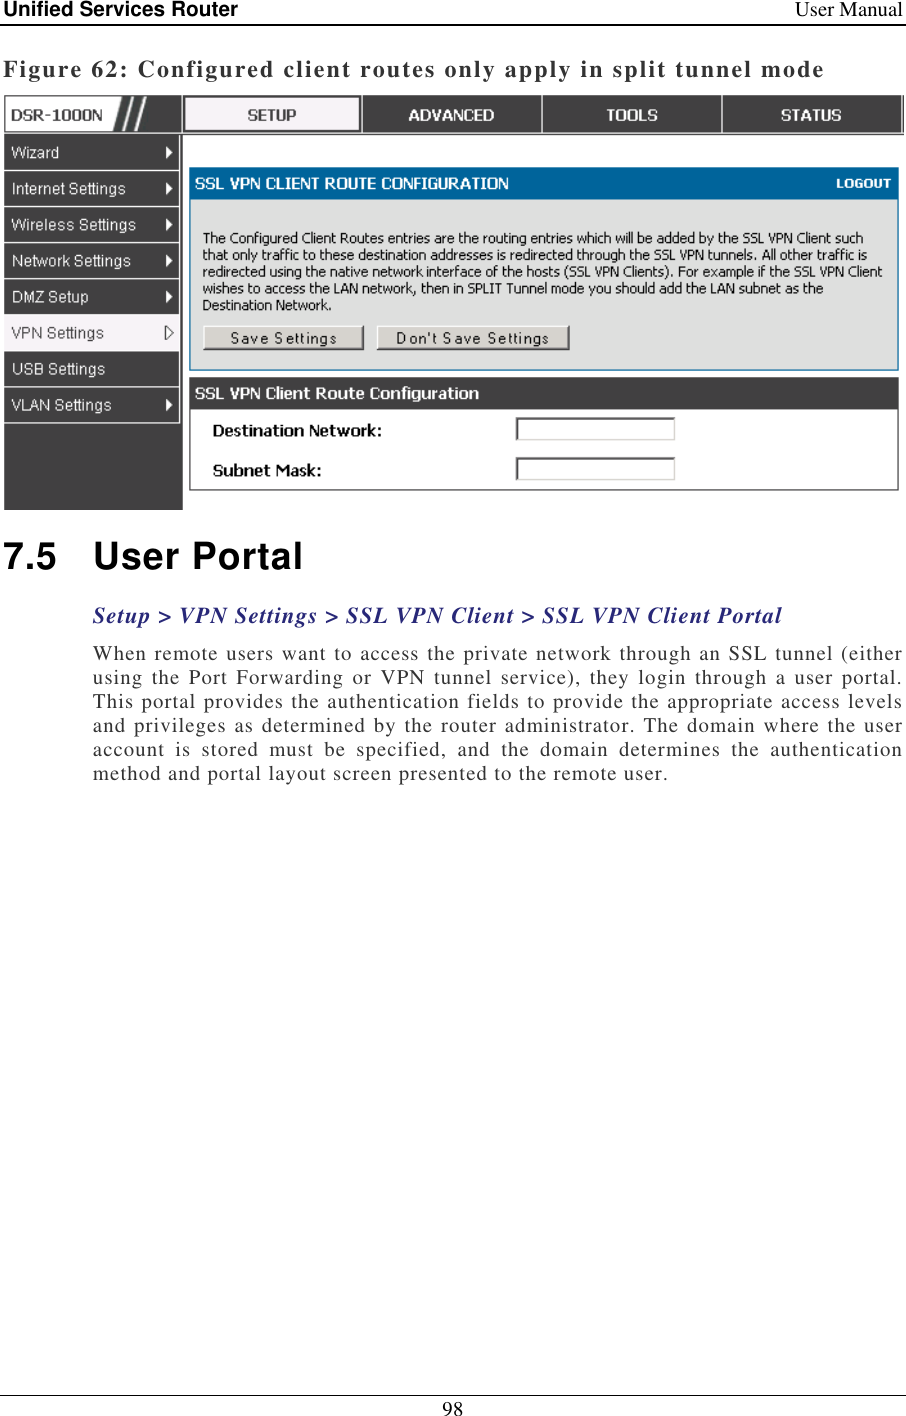 Unified Services Router    User Manual 98  Figure 62: Configured client routes only apply in split tunnel mode  7.5  User Portal Setup &gt; VPN Settings &gt; SSL VPN Client &gt; SSL VPN Client Portal When remote users want to access the private network through an SSL tunnel (either using  the  Port  Forwarding  or  VPN  tunnel  service),  they  login  through  a  user  portal. This portal provides the authentication fields to provide the appropriate access levels and privileges as determined by the router administrator. The domain where the user account  is  stored  must  be  specified,  and  the  domain  determines  the  authentication method and portal layout screen presented to the remote user.  